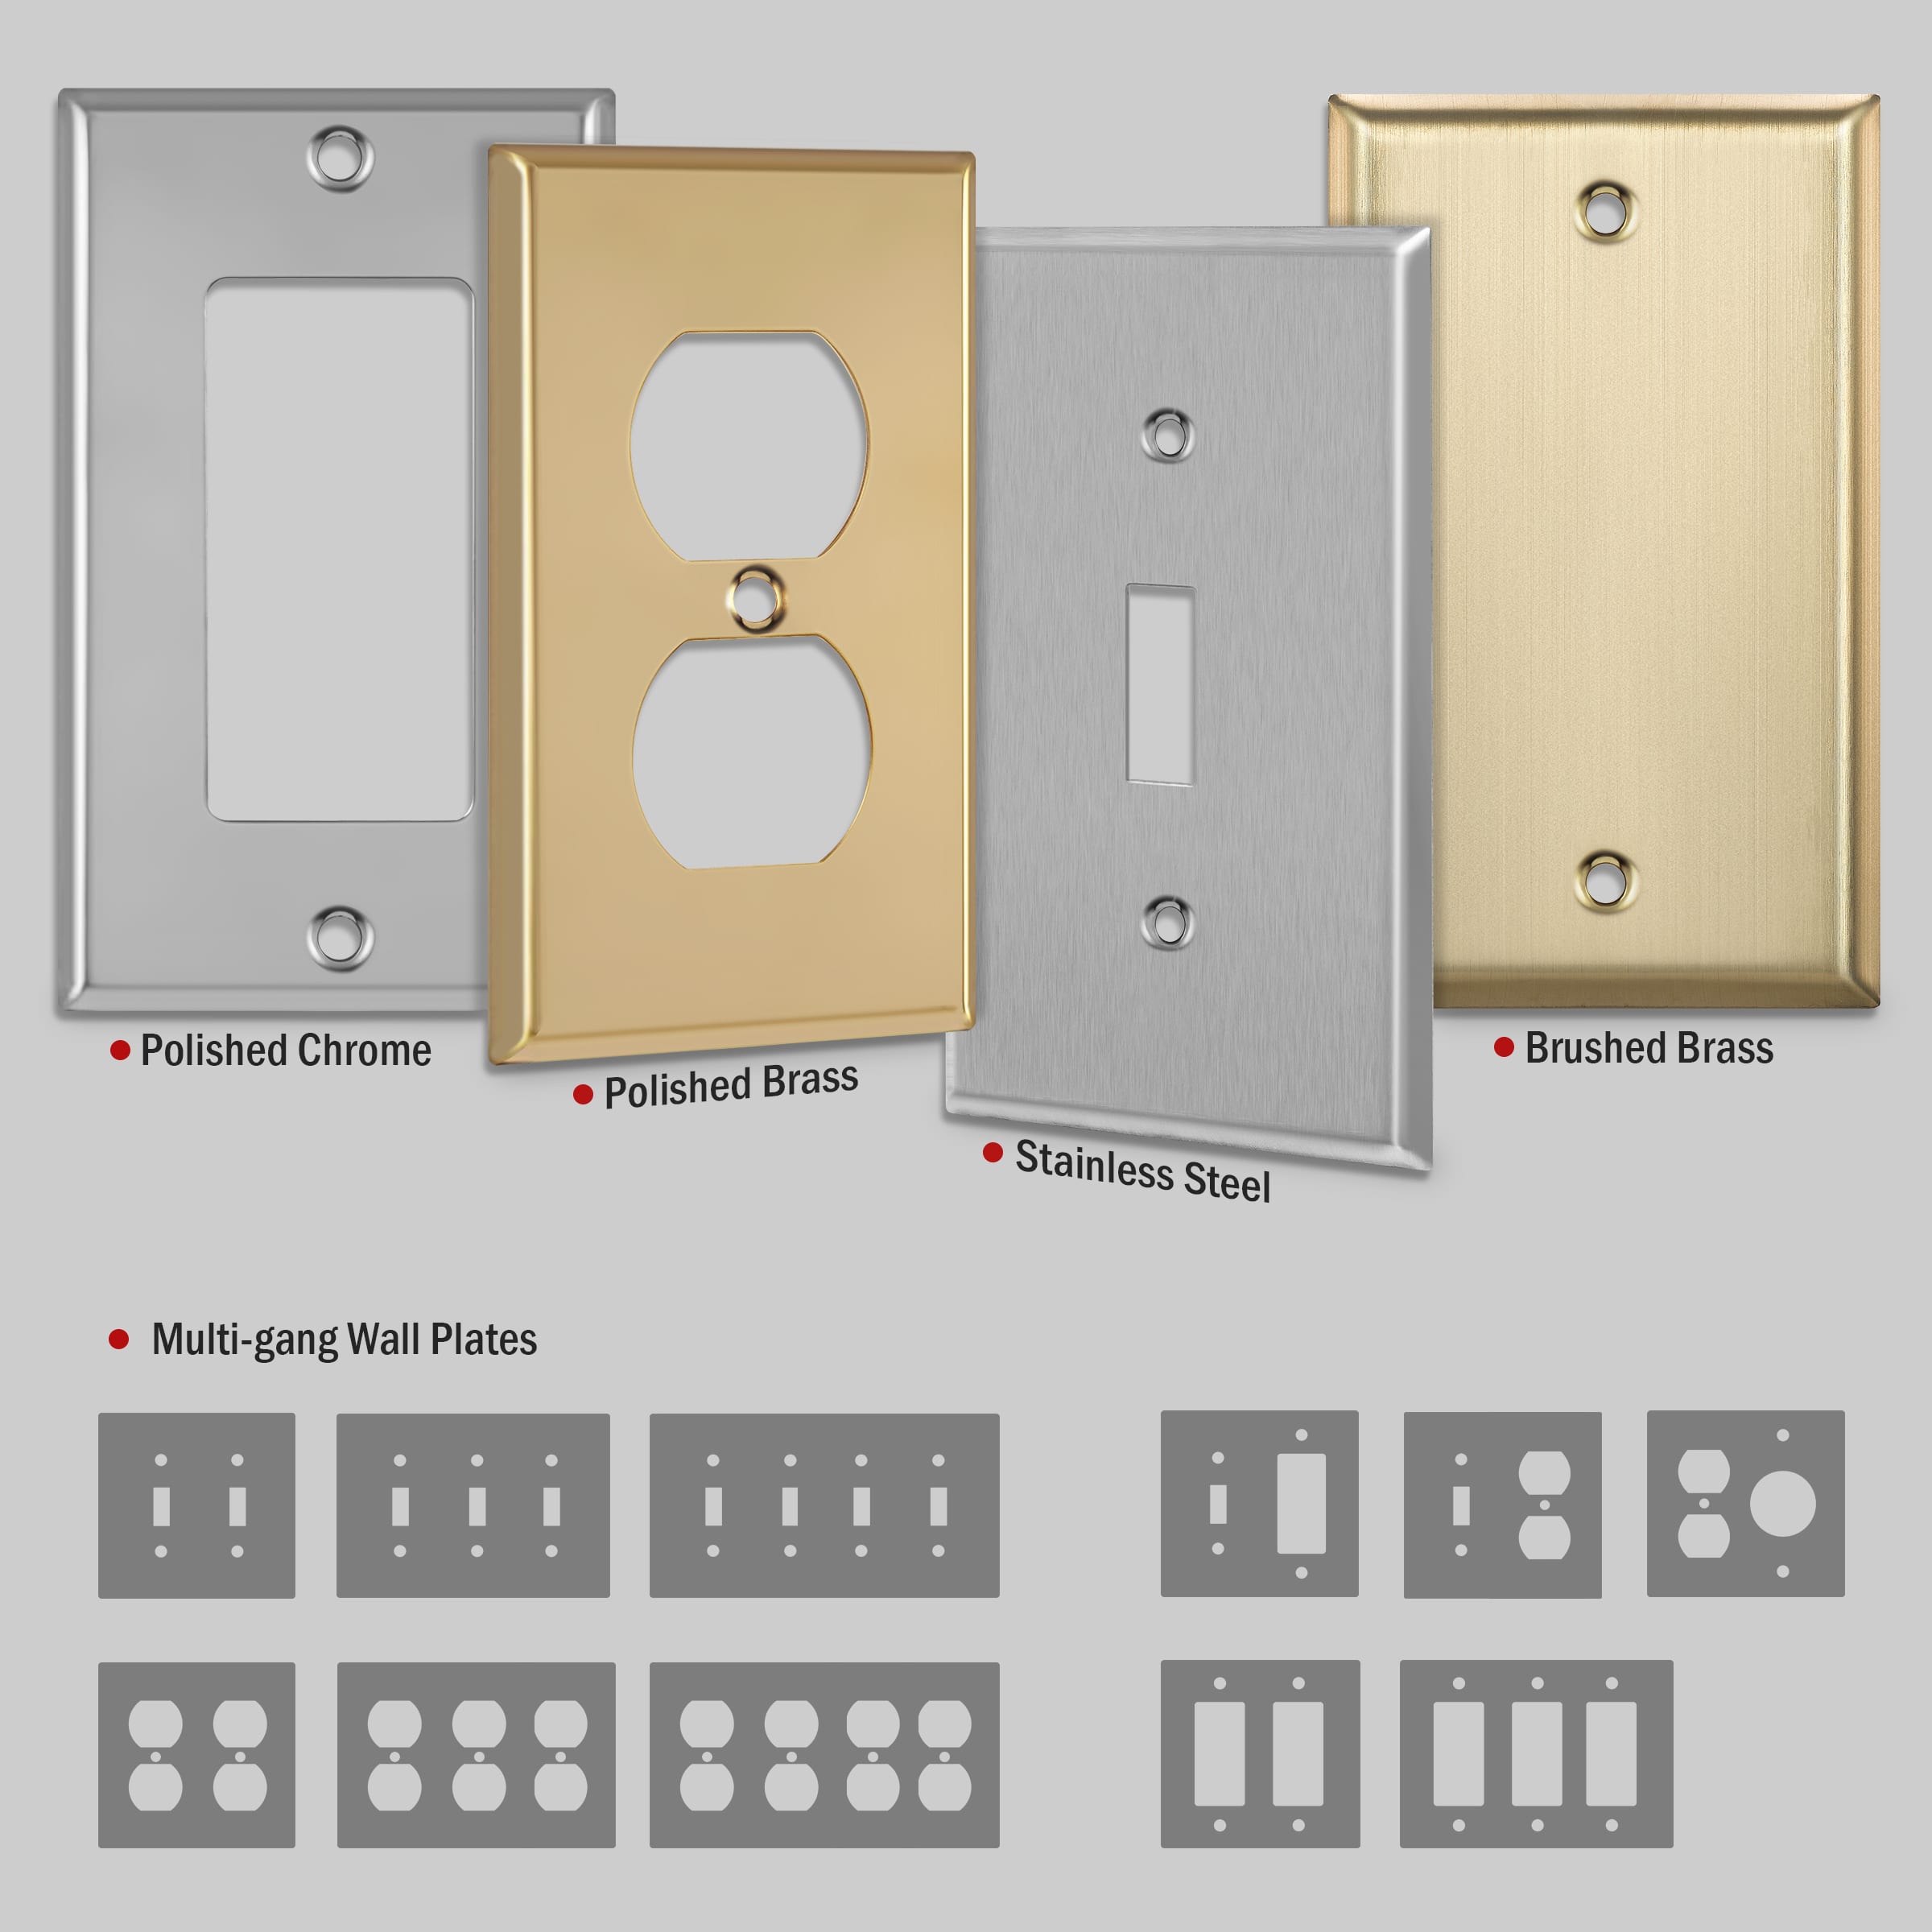 2-Gang Stainless Steel Duplex Outlet/Toggle Switch Combination Wall Plate